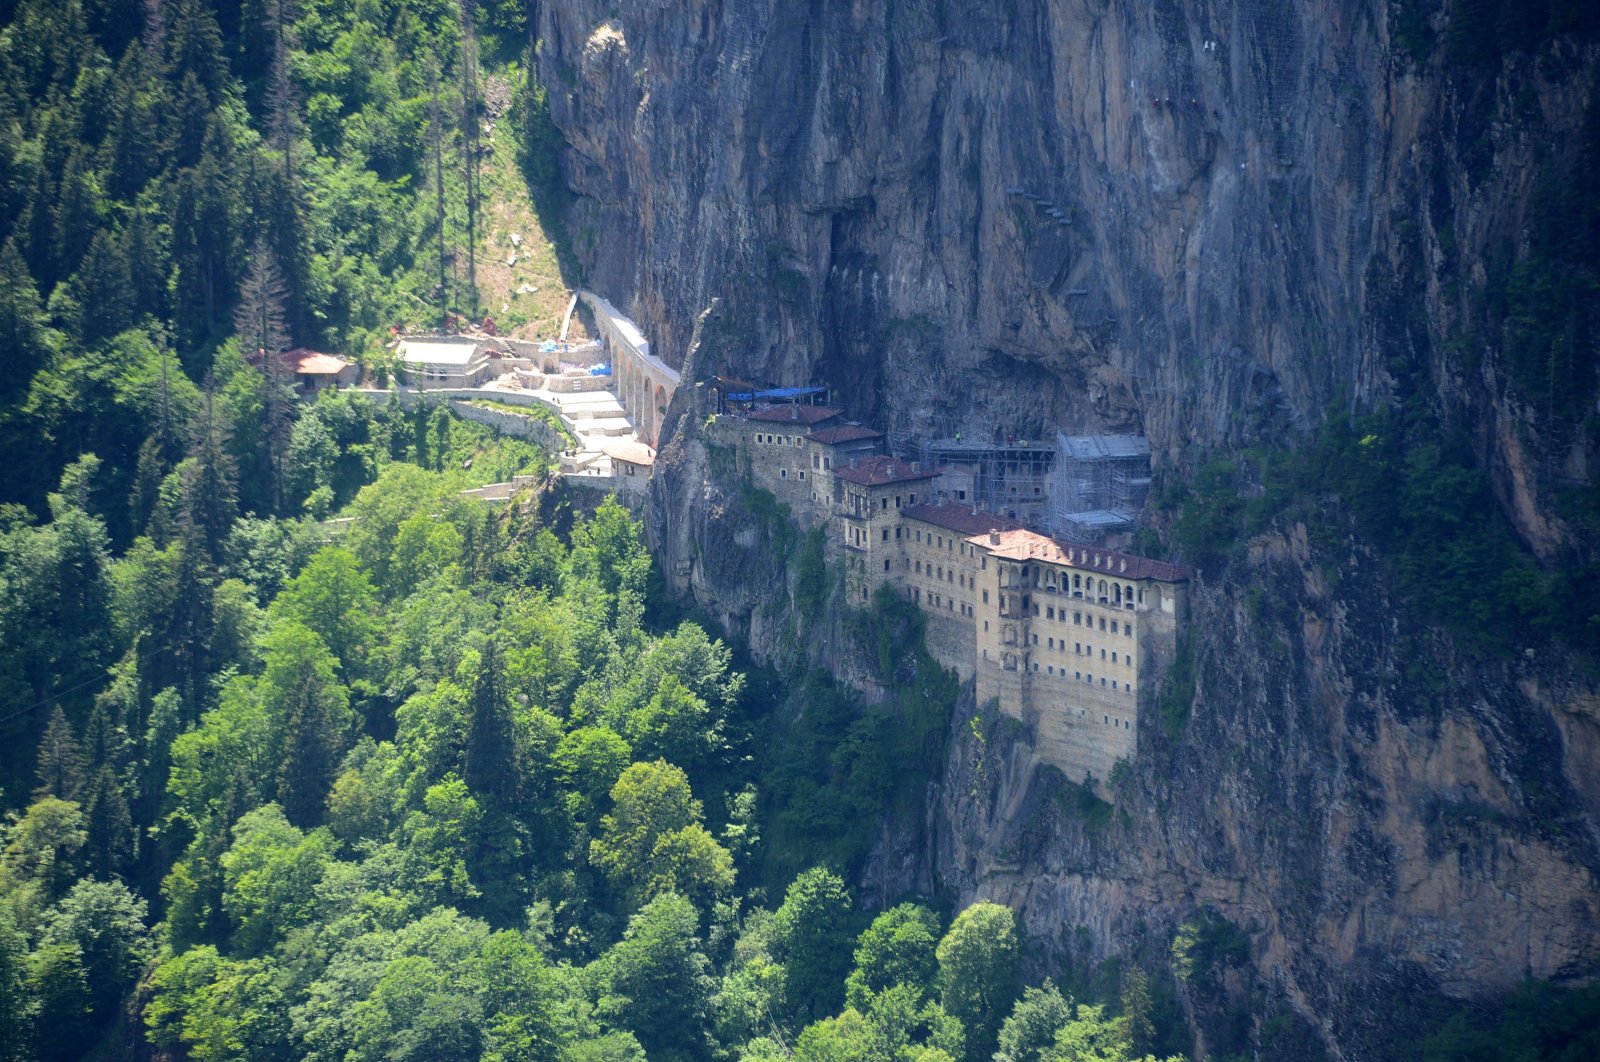 The Sümela Monastery in the Maçka district of northern Trabzon province, Turkey, July 27, 2020. (DHA Photo)